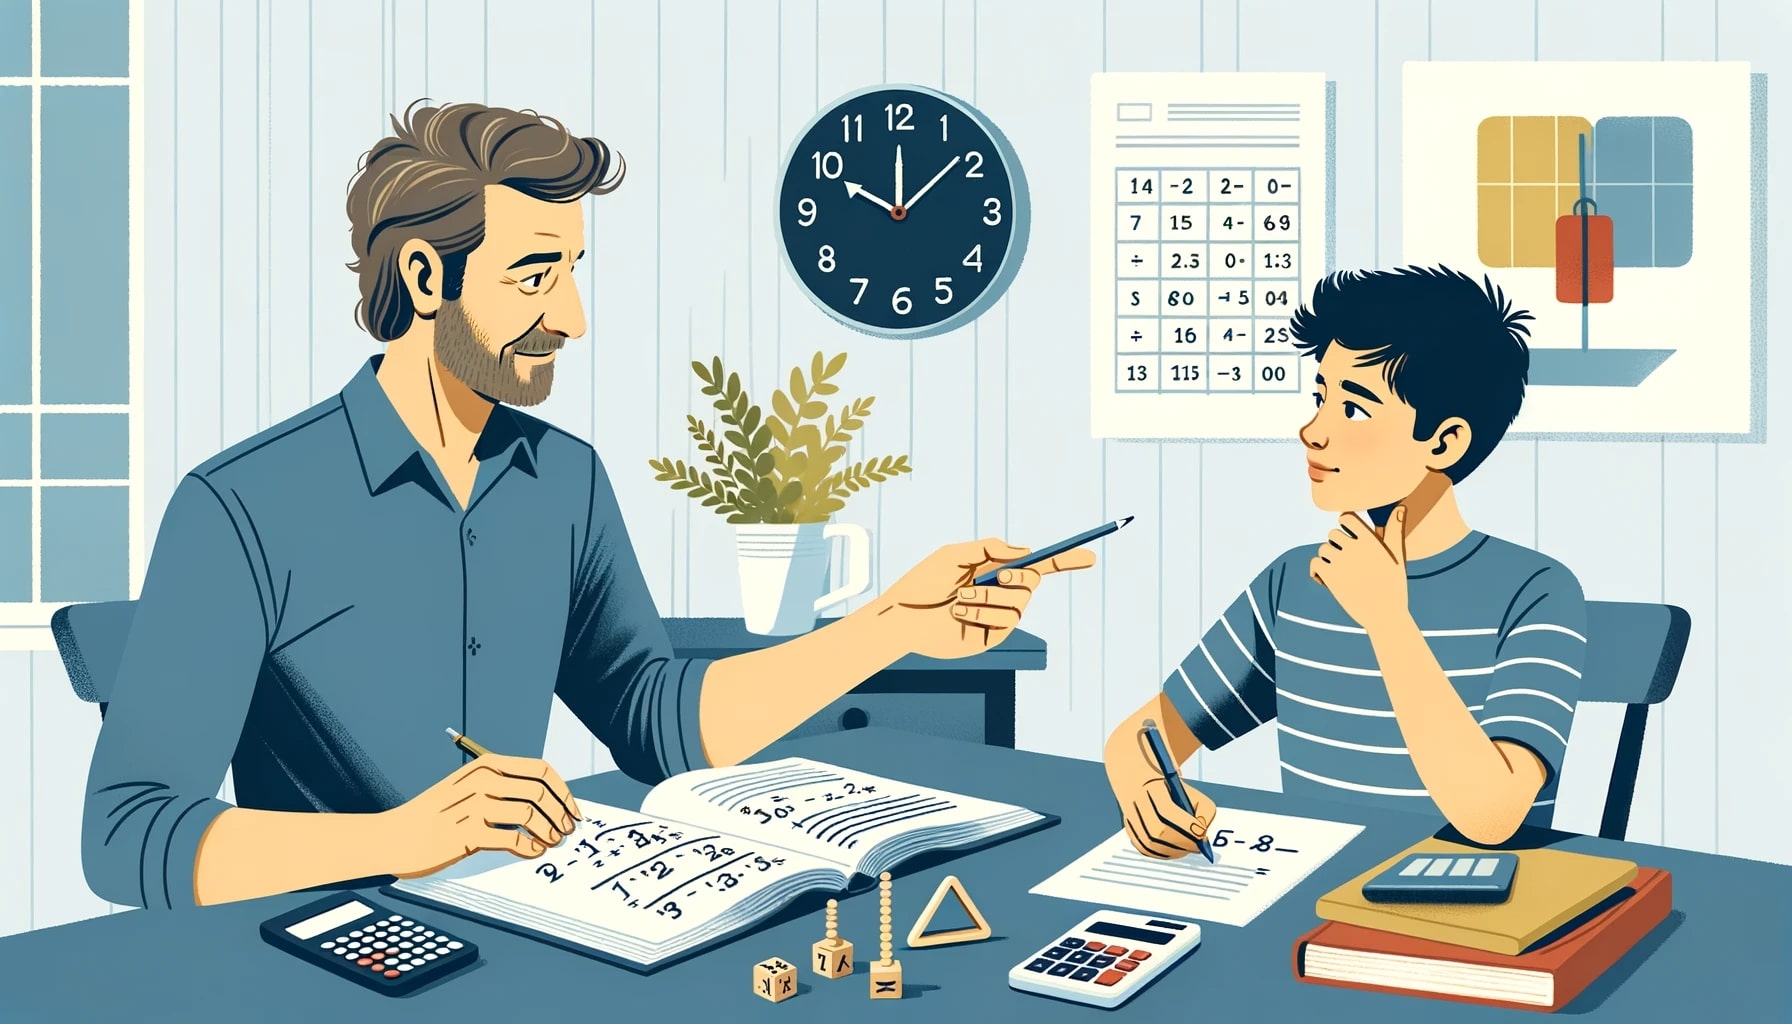 Illustration of a parent and teenager study session in a living room_ A Caucasian parent is pointing towards a maths textbook